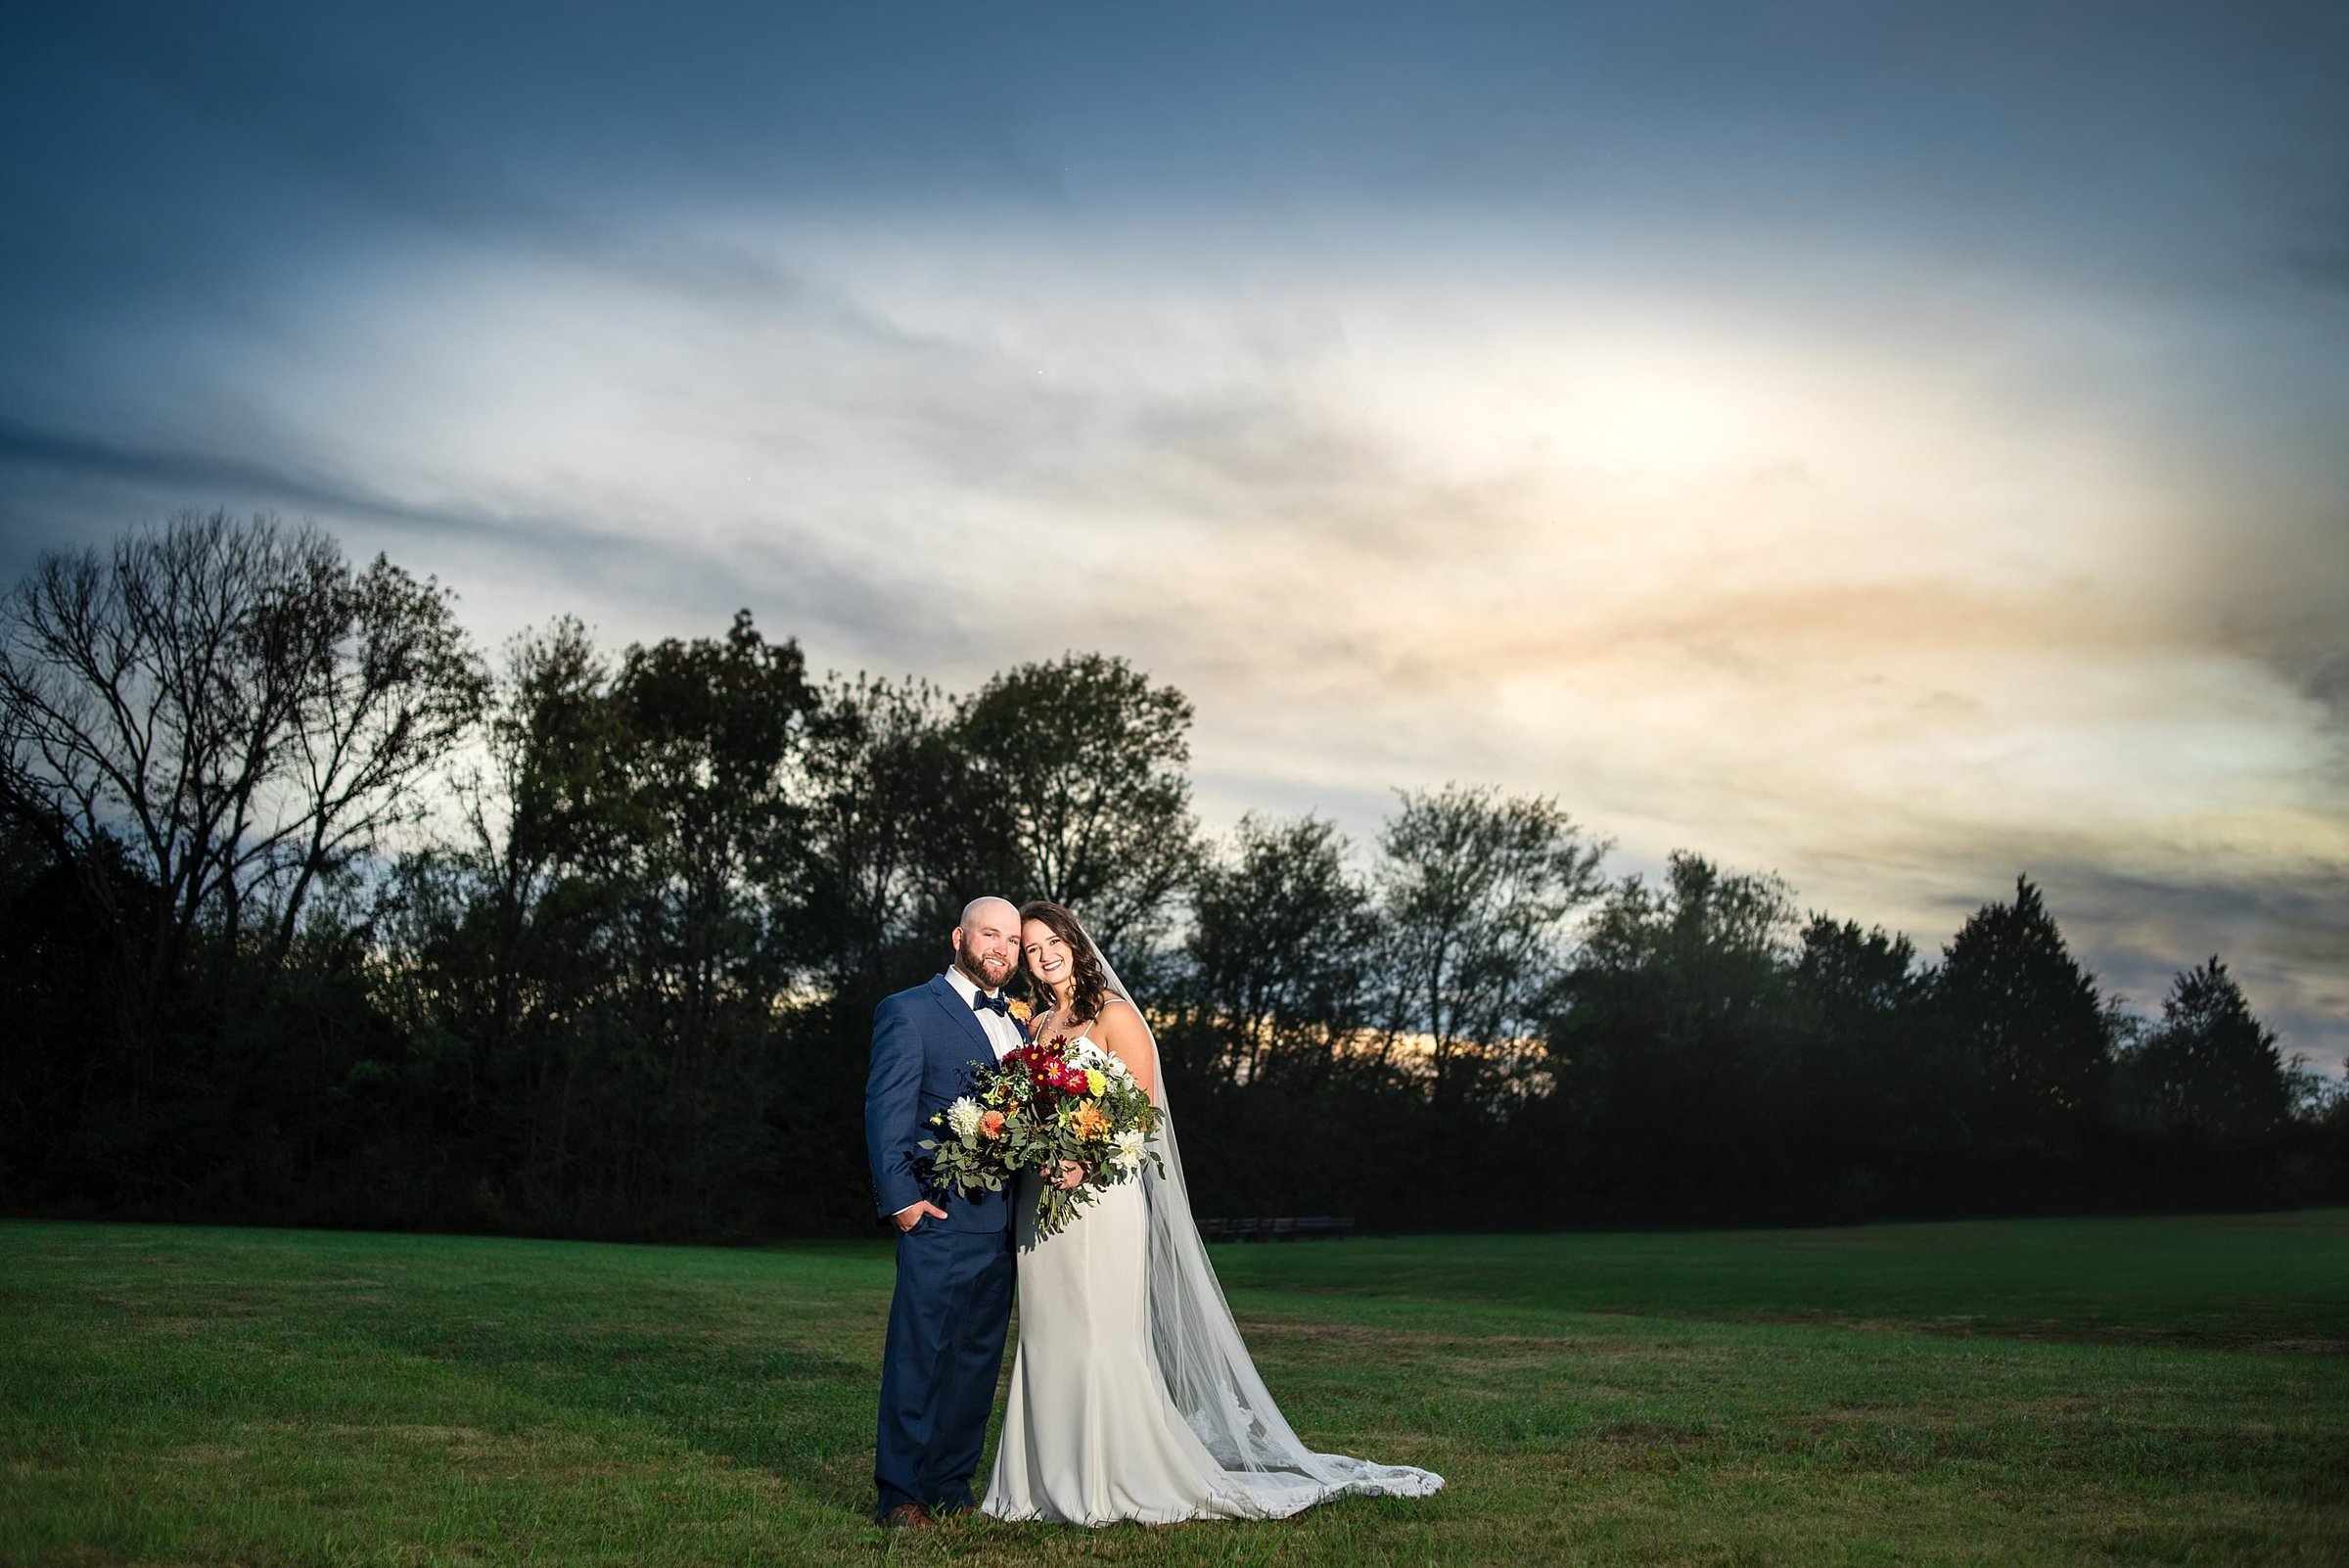 Couples portrait in grass field at sunset